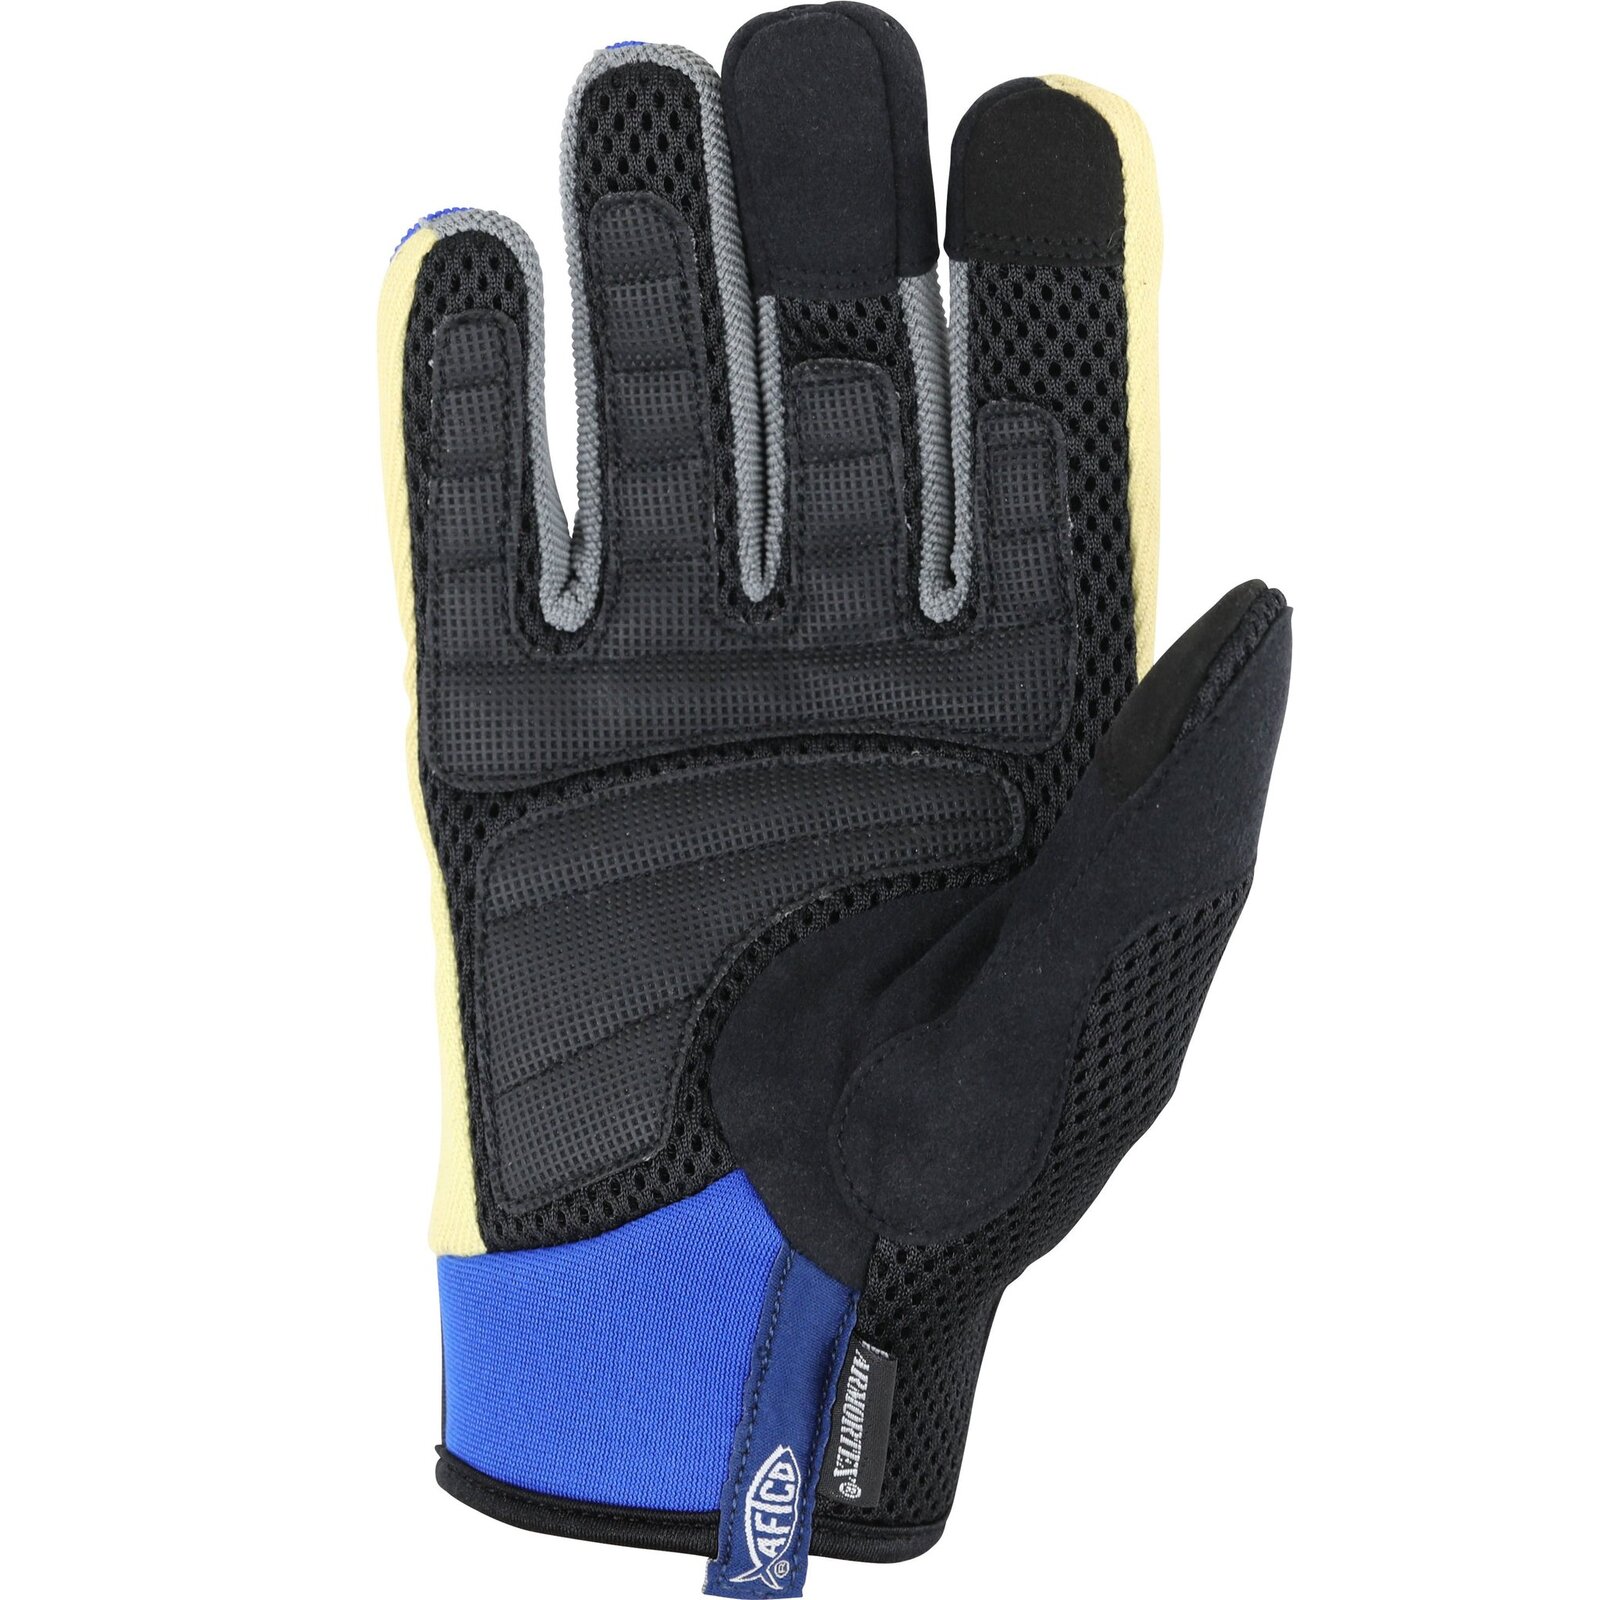 Aftco Release Gloves - AFTCO